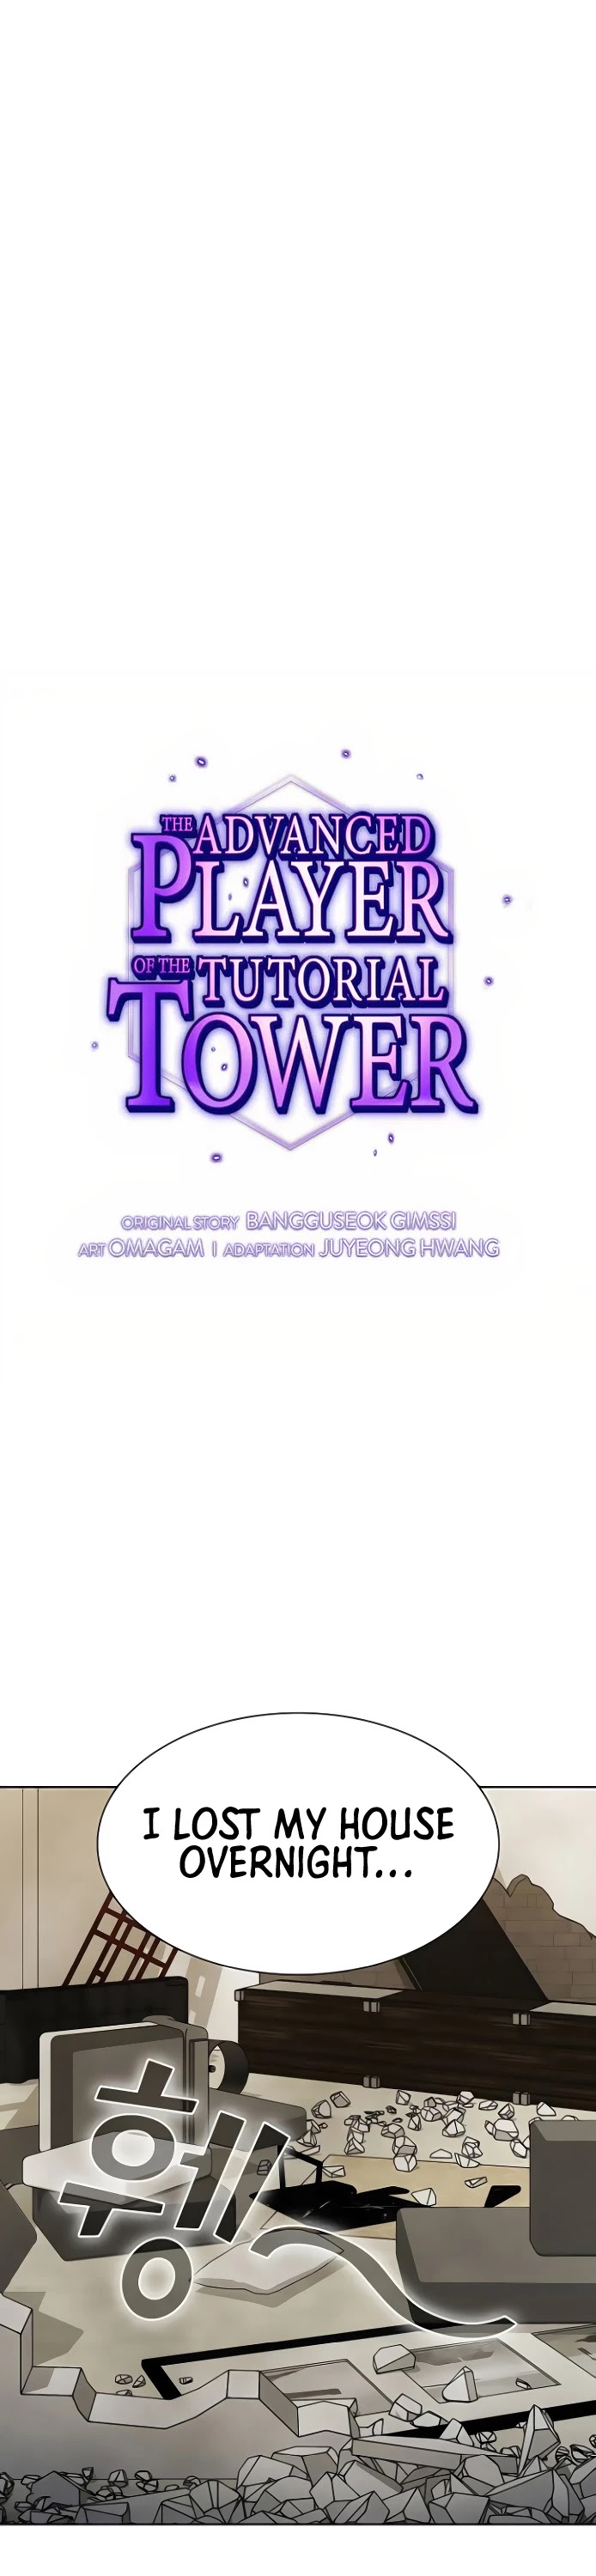 The Tutorial Tower's Advanced Player - Page 2